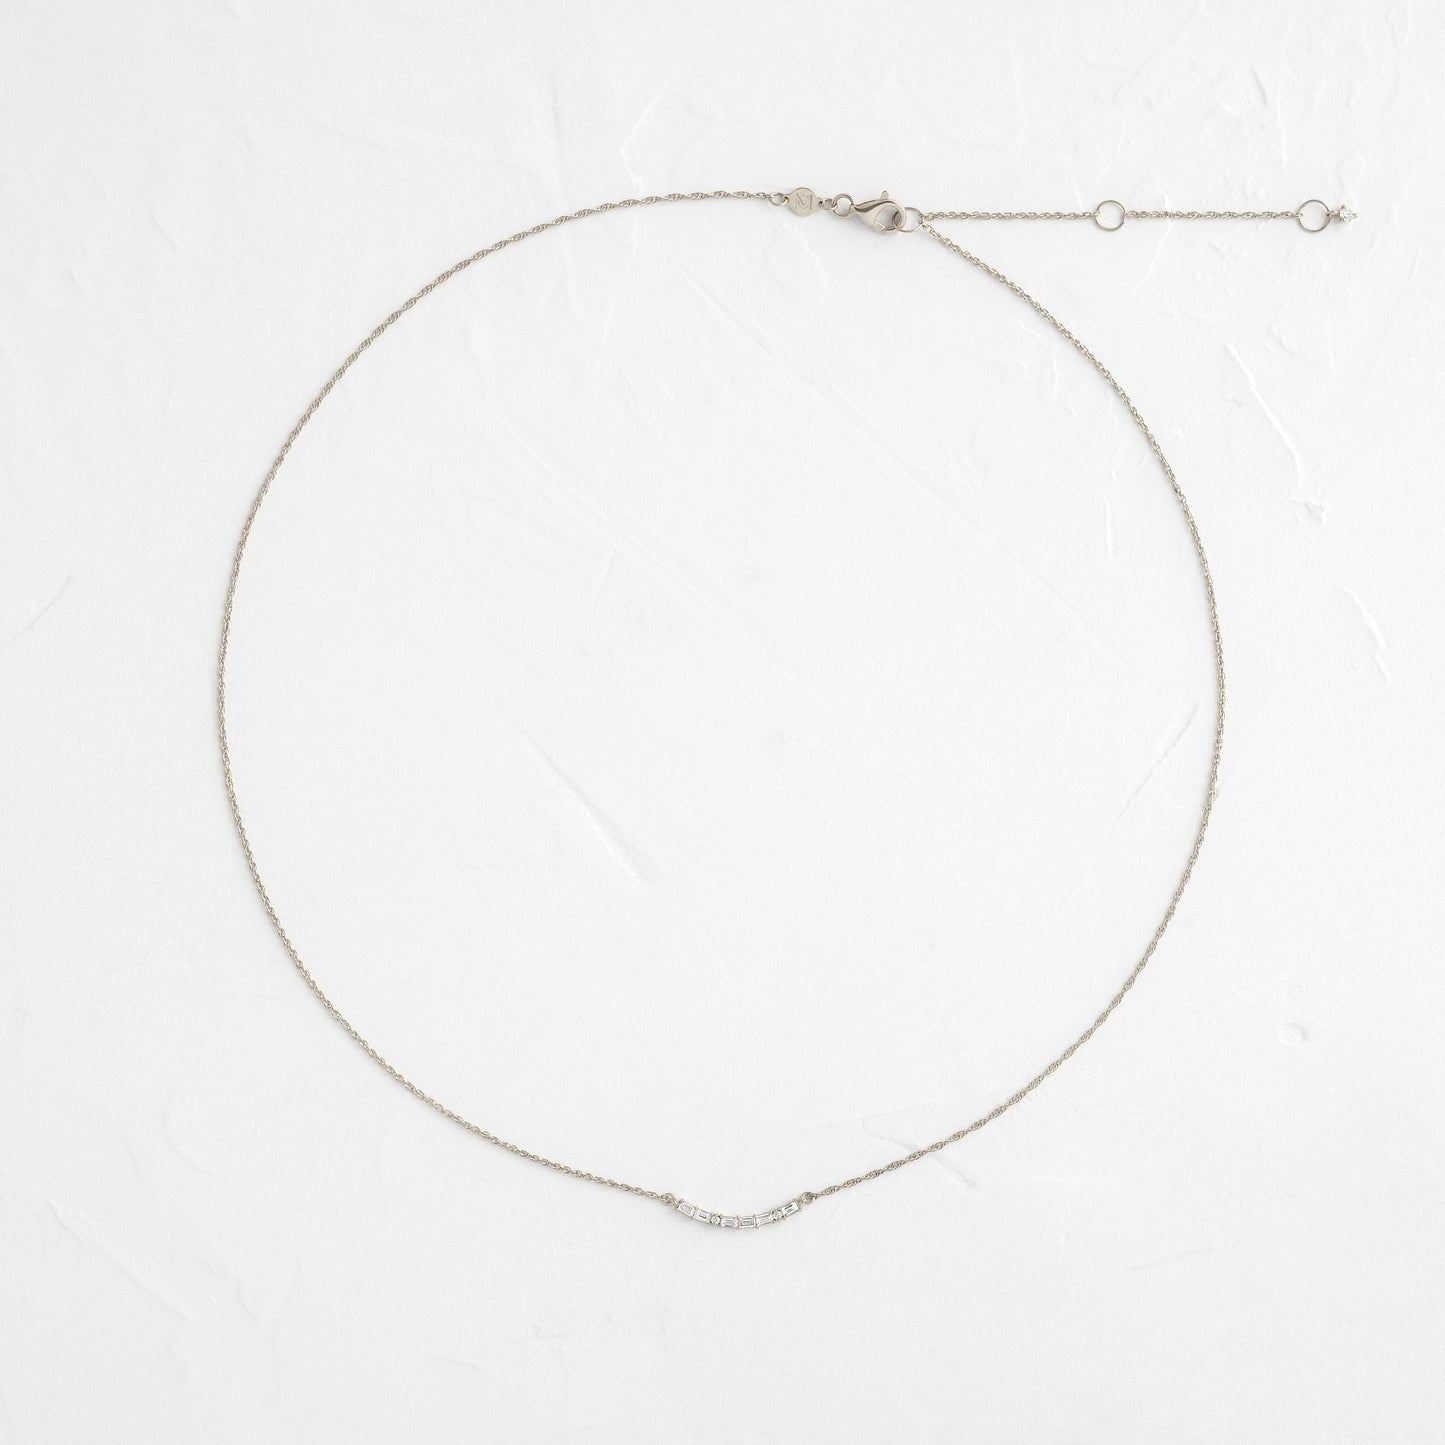 Morse Code Necklace - In Stock